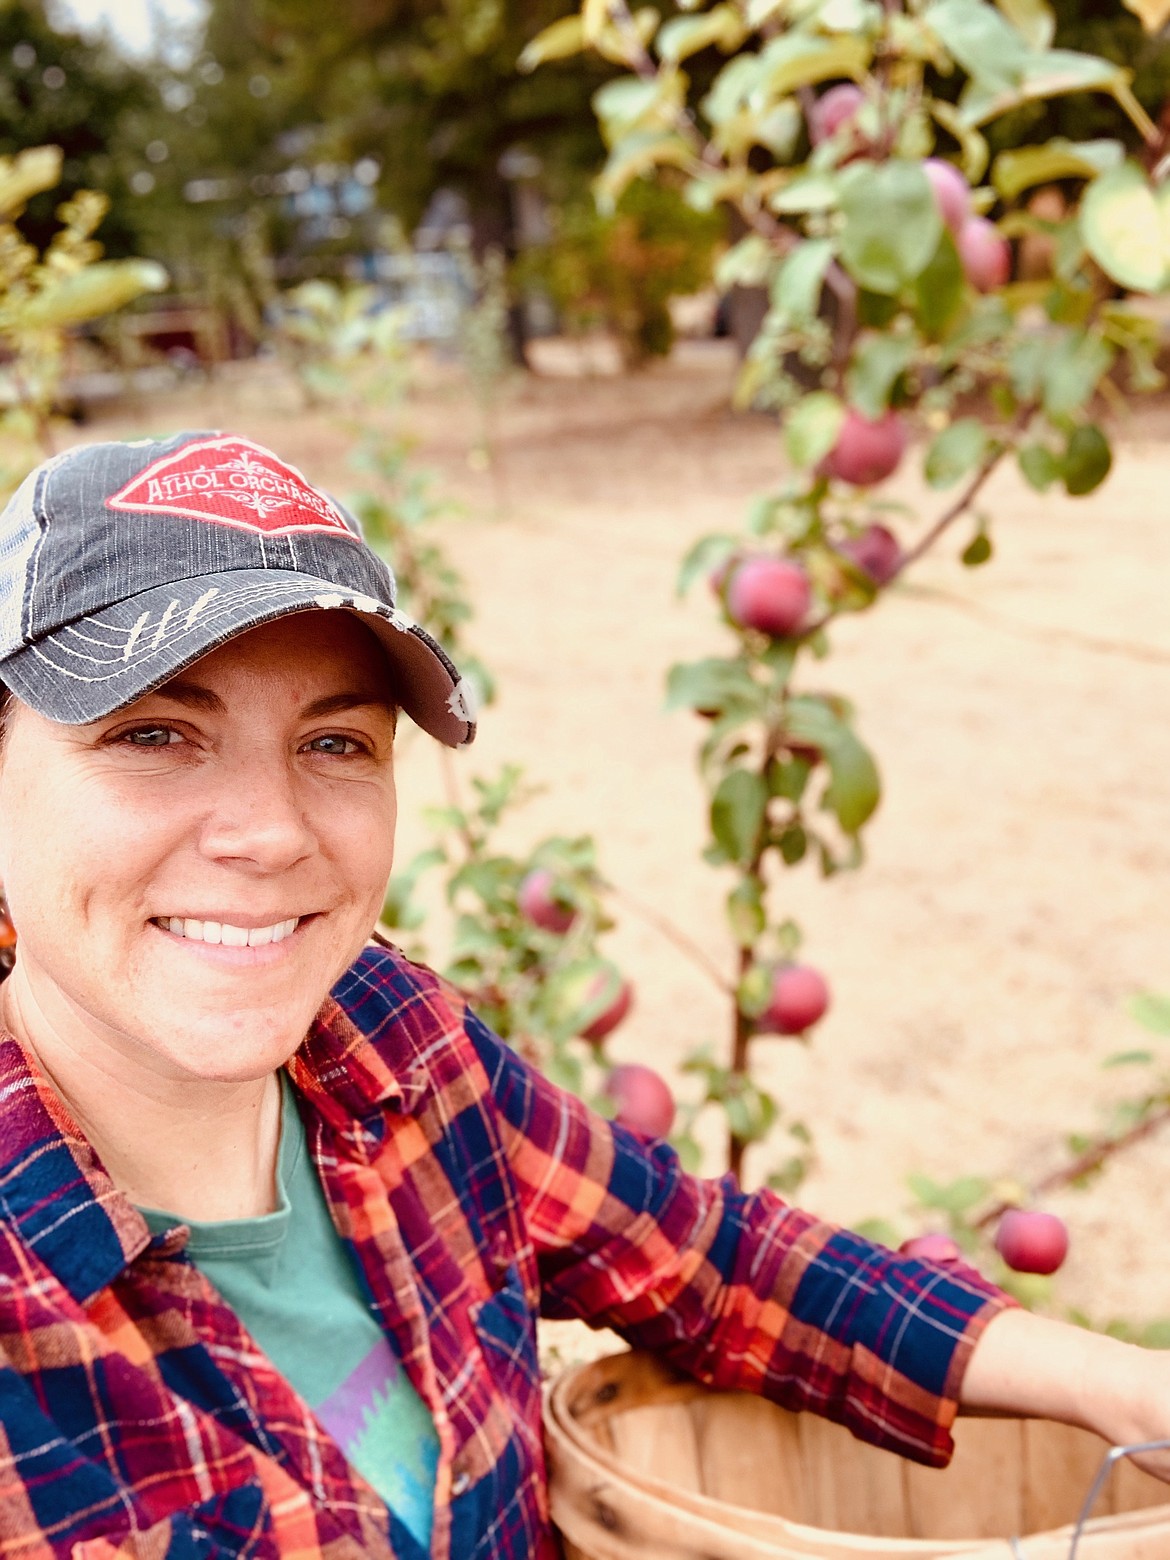 Nikki Conley combines her love of American history with her work as an orchardist and owner of Athol Orchards. In addition to teaching visitors and children about apple production and offering apple products, the orchard features several historic apple varieties.